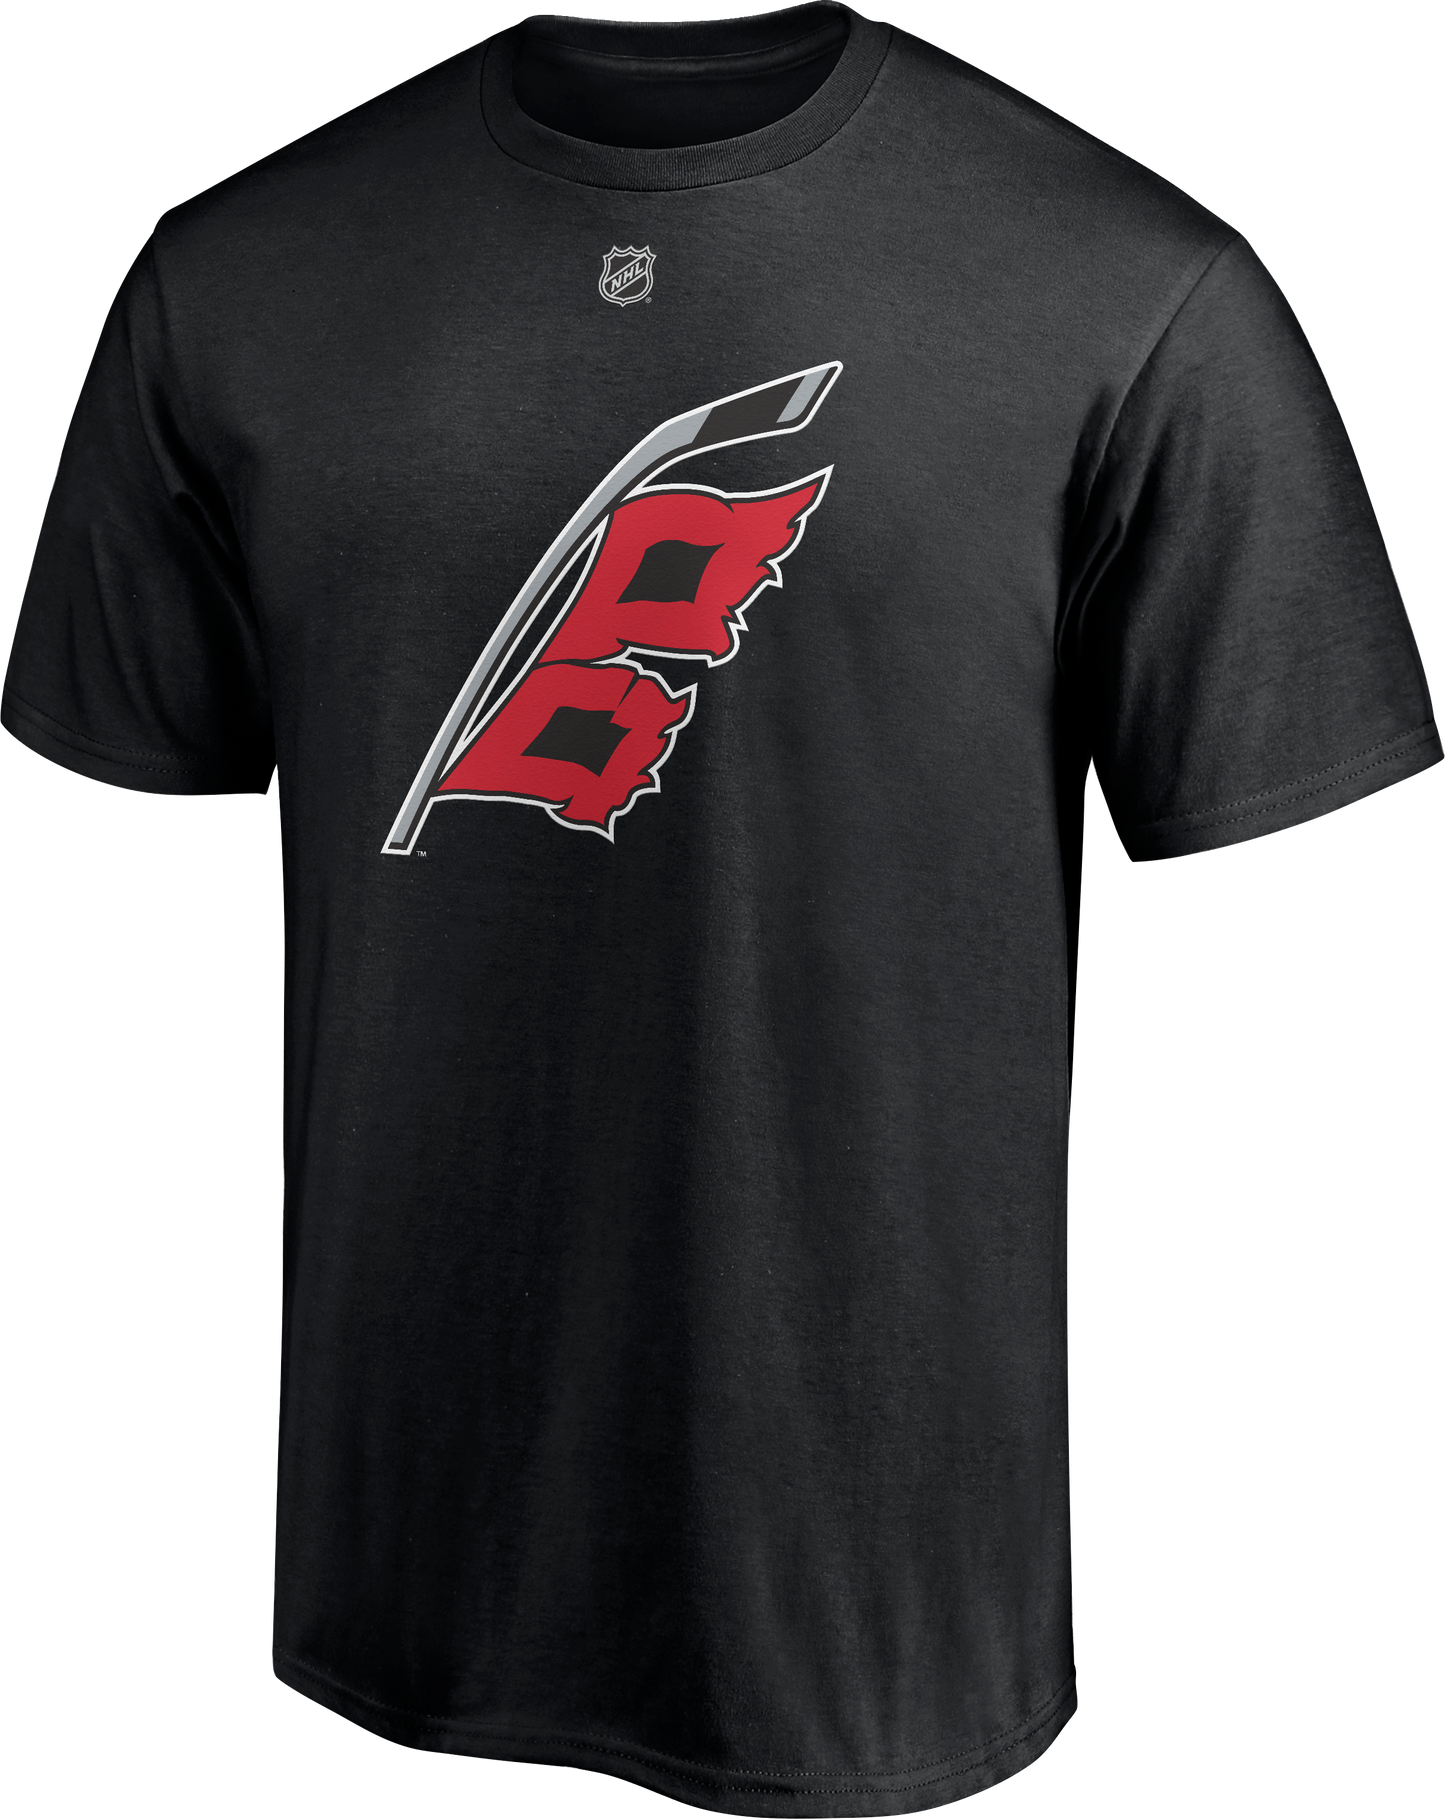 Front View: Black tee with Hurricanes flag logo and NHL Shield